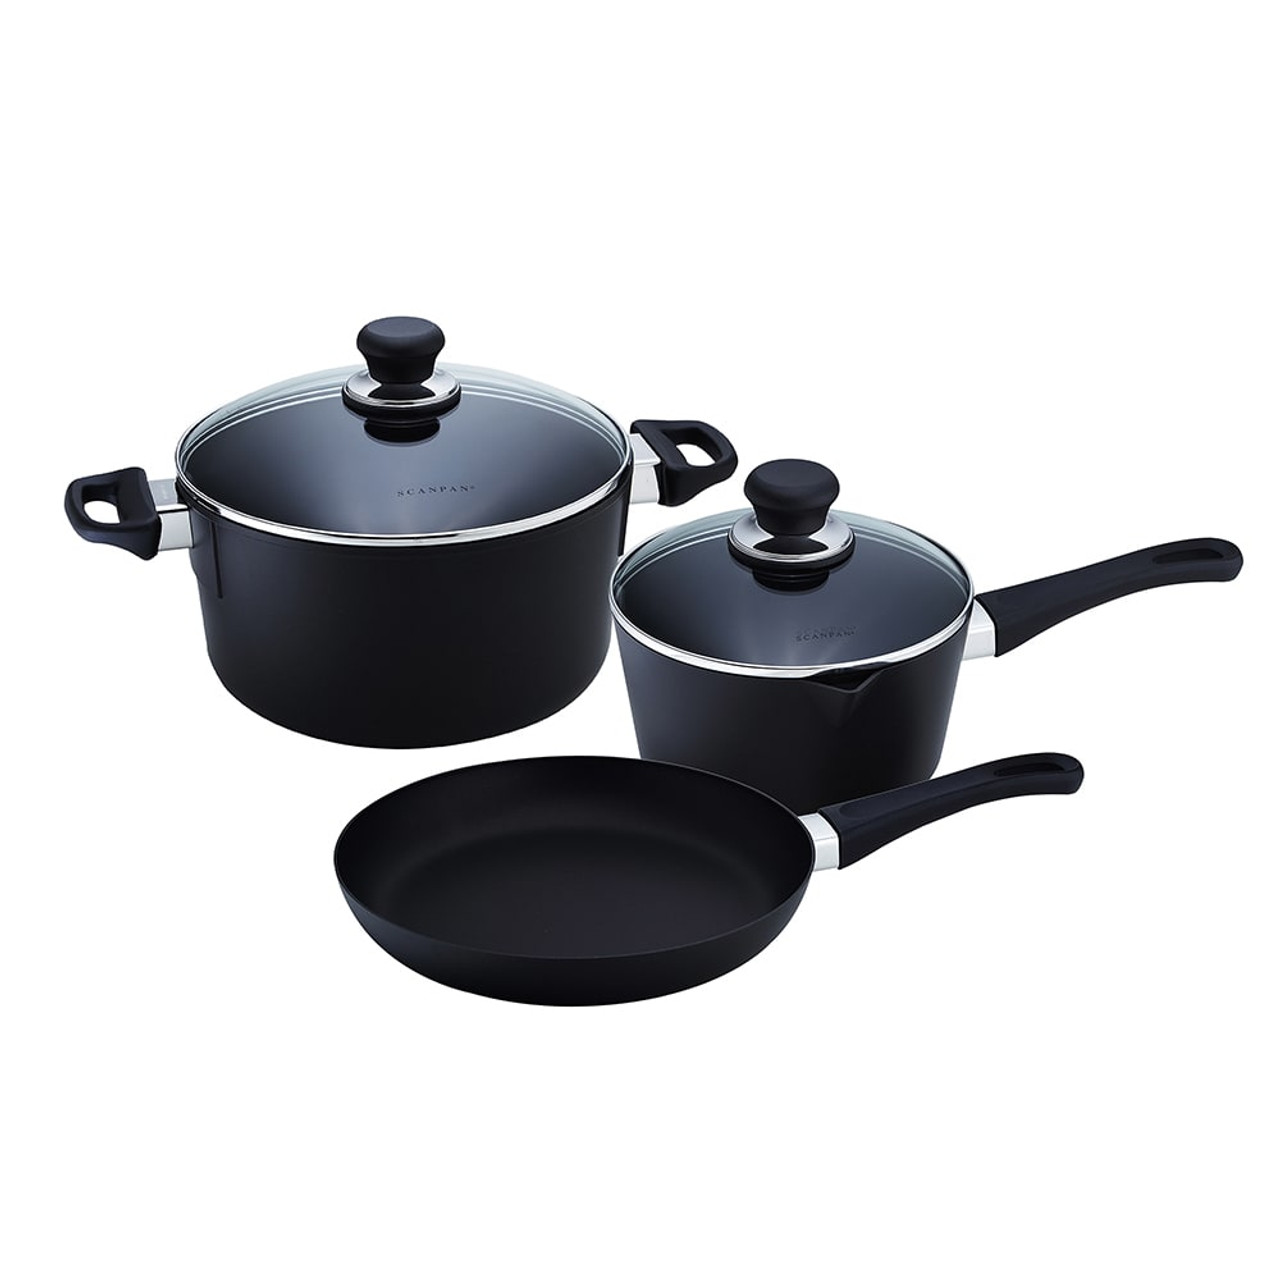 https://cdn11.bigcommerce.com/s-hccytny0od/images/stencil/1280x1280/products/2375/8002/scanpan-classic-cookware-set-5pc__40868.1552987091.jpg?c=2?imbypass=on